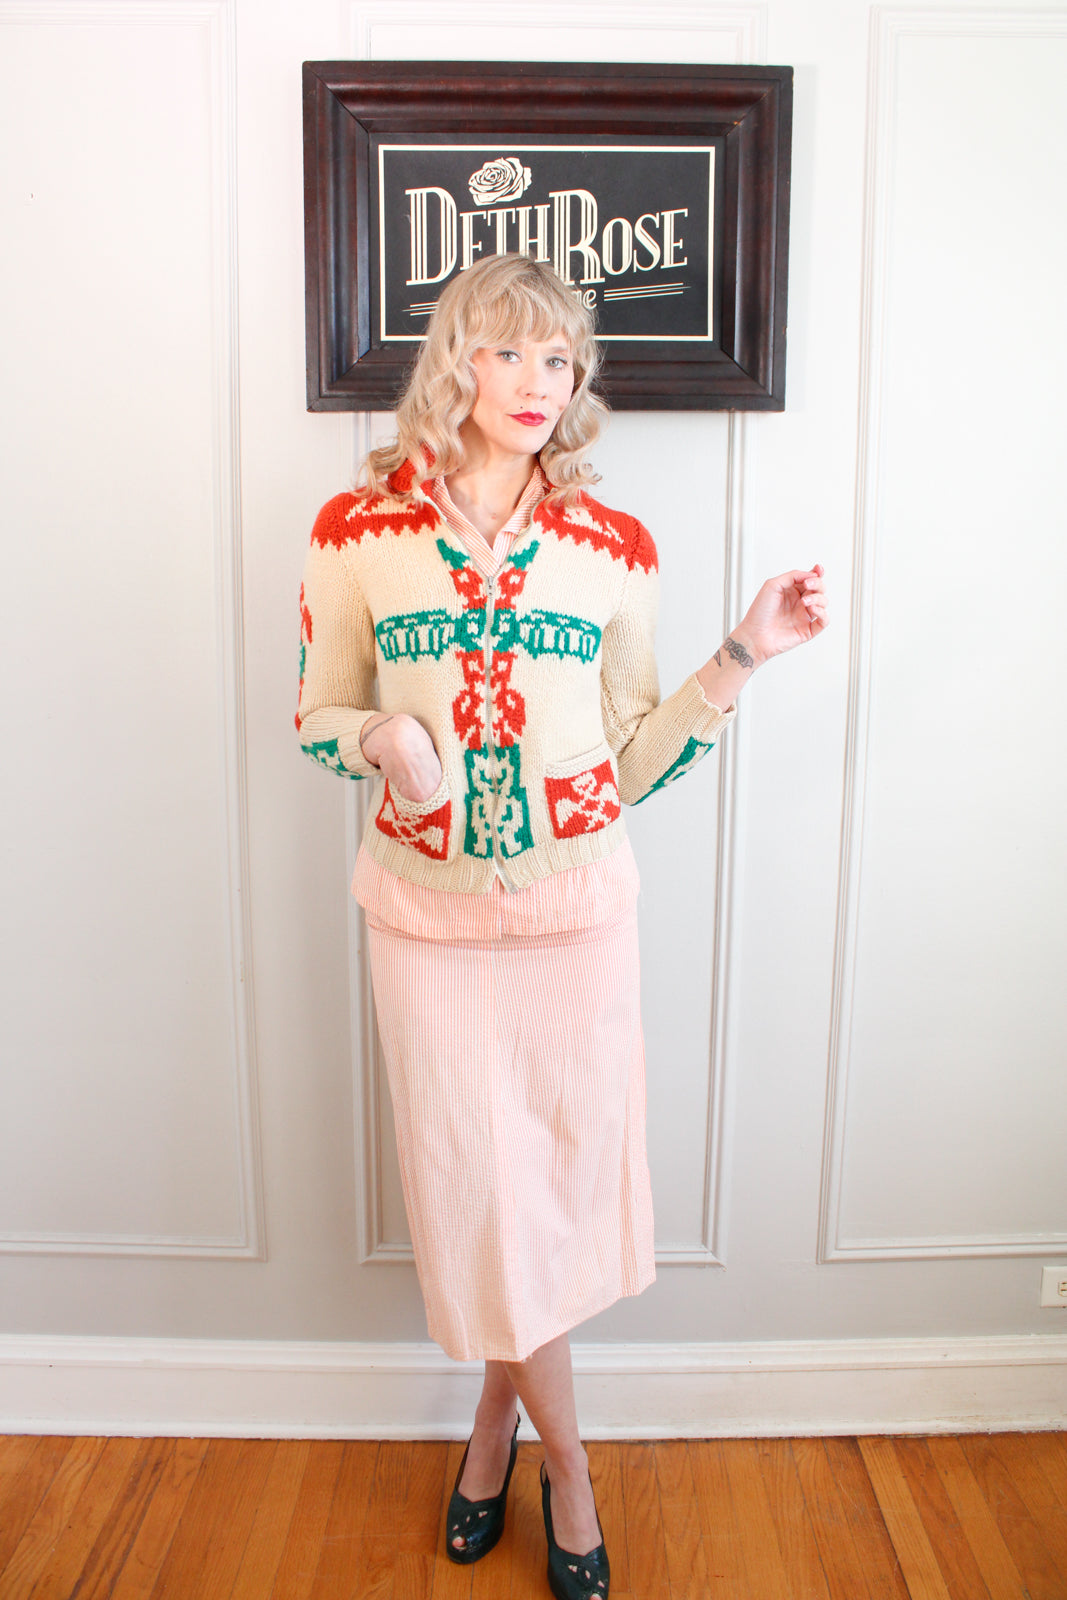 Late 1950s Cowichan Totem Pole Curling Sweater - Xsmall